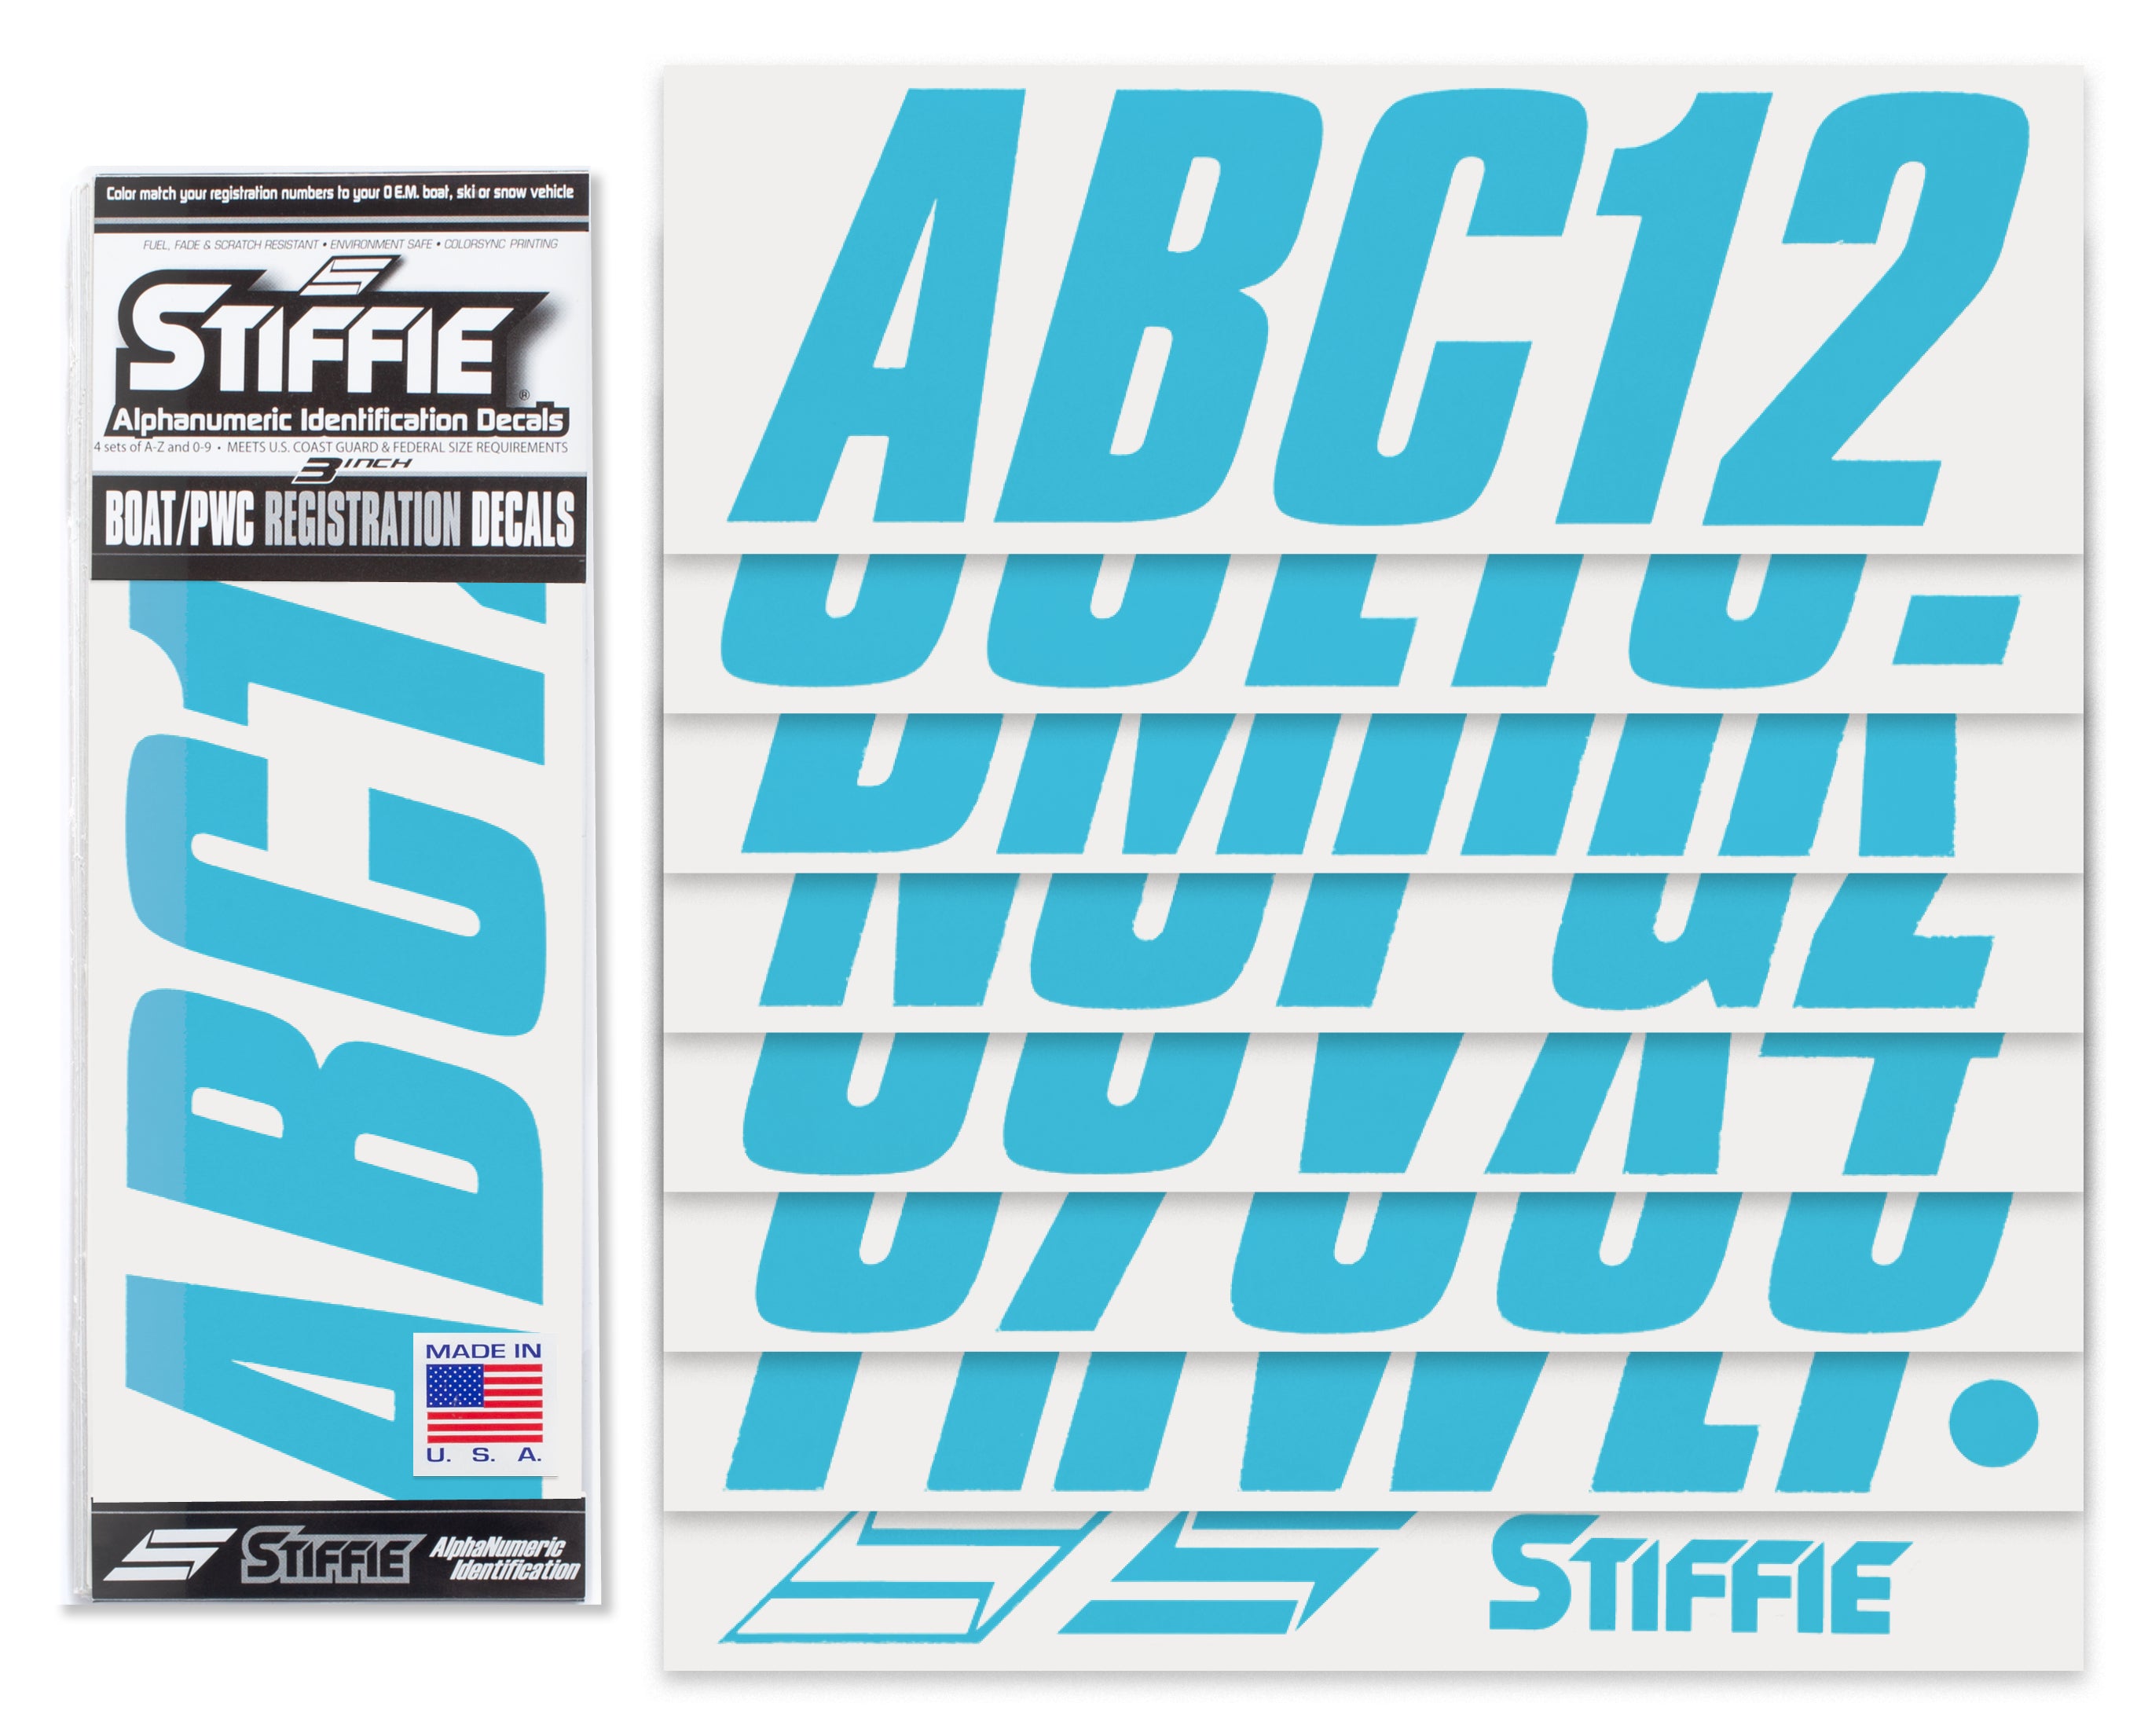 STIFFIE Shift Sky Blue 3" ID Kit Alpha-Numeric Registration Identification Numbers Stickers Decals for Boats & Personal Watercraft